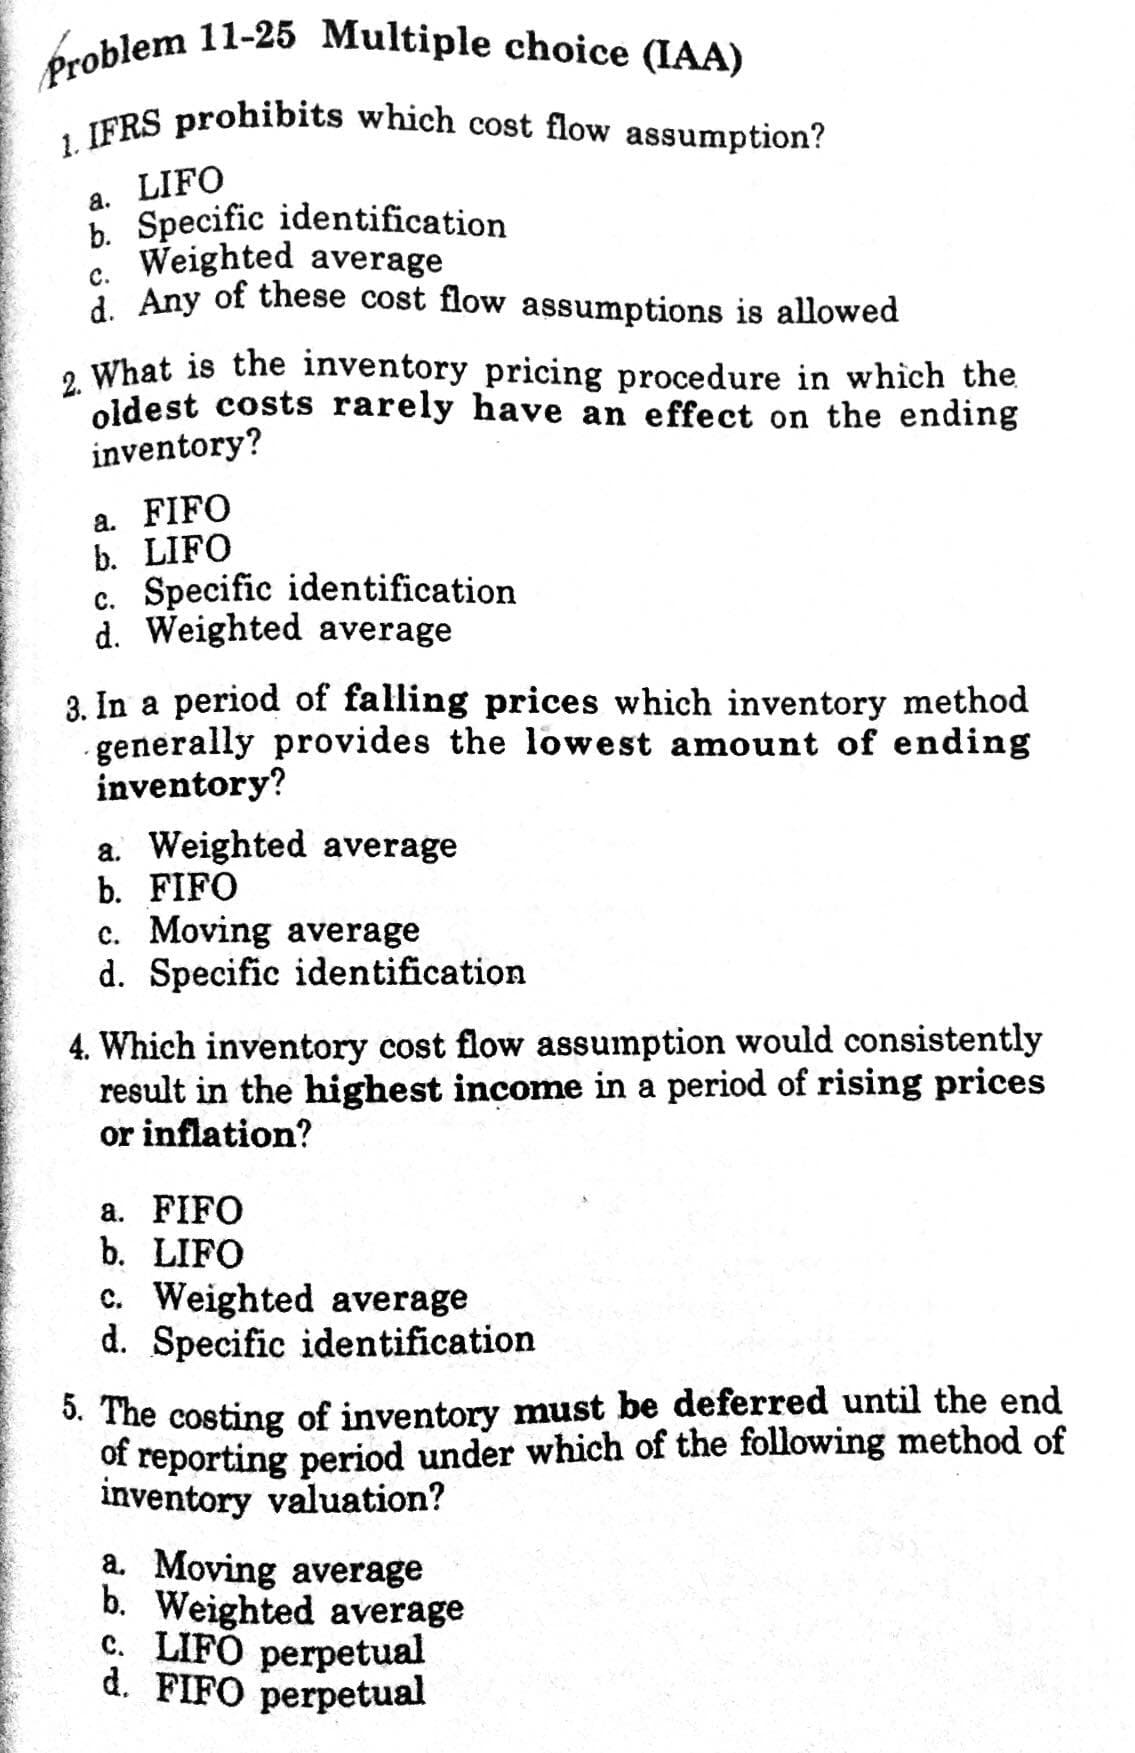 Problem 11-25 Multiple choice (IAA)
1. IFRS prohibits which cost flow assumption?
a. LIFO
b. Specific identification
6. Weighted average
i Any of these cost flow assumptions is allowed
с.
, What is the inventory pricing procedure in which the
oldest costs rarely have an effect on the ending
inventory?
a. FIFO
b. LIFO
c. Specific identification
d. Weighted average
3. In a period of falling prices which inventory method
generally provides the lowest amount of ending
inventory?
a. Weighted average
b. FIFO
c. Moving average
d. Specific identification
4. Which inventory cost flow assumption would consistently
result in the highest income in a period of rising prices
or inflation?
a. FIFO
b. LIFO
c. Weighted average
d. Specific identification
3. The costing of inventory must be deferred until the end
of reporting period under which of the following method of
inventory valuation?
a. Moving average
b. Weighted average
c. LIFÓ perpetual
d. FIFO perpetual
